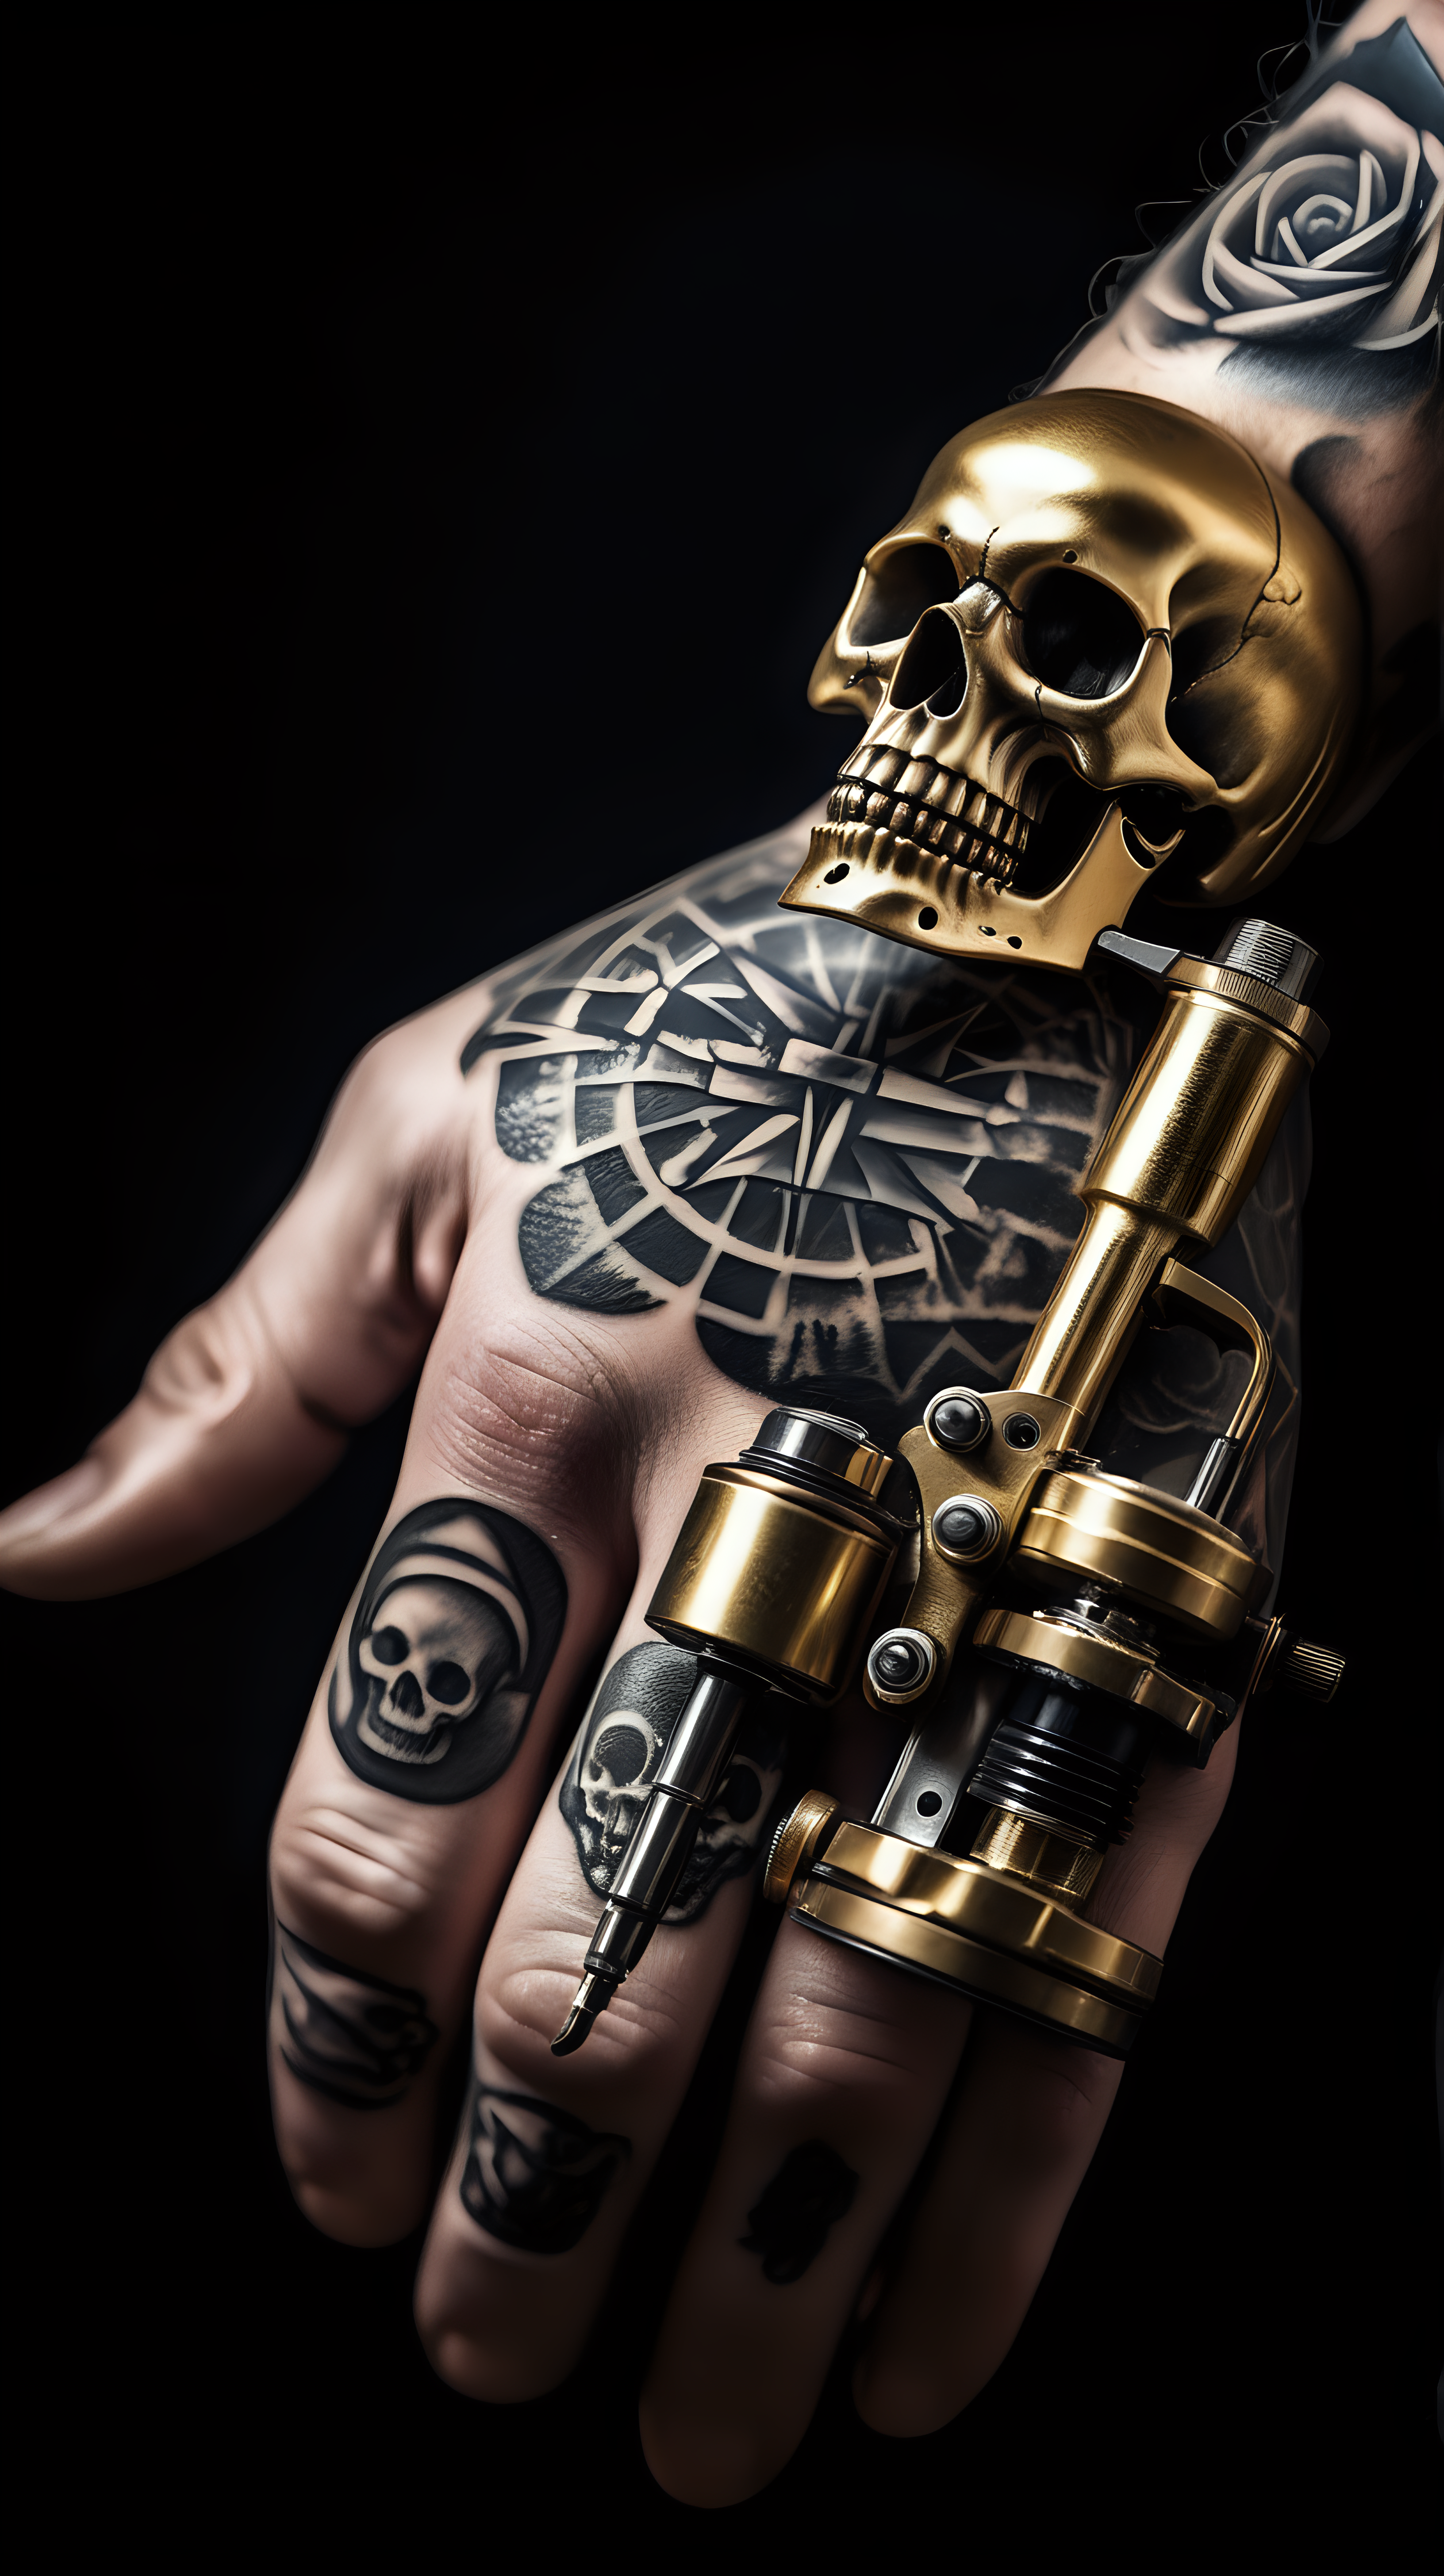 /imagine prompt : An ultra-realistic photograph captured with a canon 5d mark III camera, equipped with an macro lens at F 5.8 aperture setting, capturing a vintage classic tattoo machine ,a pattern of the skull is engraved on it's golden grip , grabbed by a hand wearing black nitrile gloves.
the hand is blurred and the focus sets on tattoogun's grip.
Soft spot light gracefully illuminates the subject and golden grip is shining. The background is absolutely black , highlighting the subject.
The image, shot in high resolution and a 16:9 aspect ratio, captures the subject’s  with stunning realism –ar 9:16 –v 5.2 –style raw
